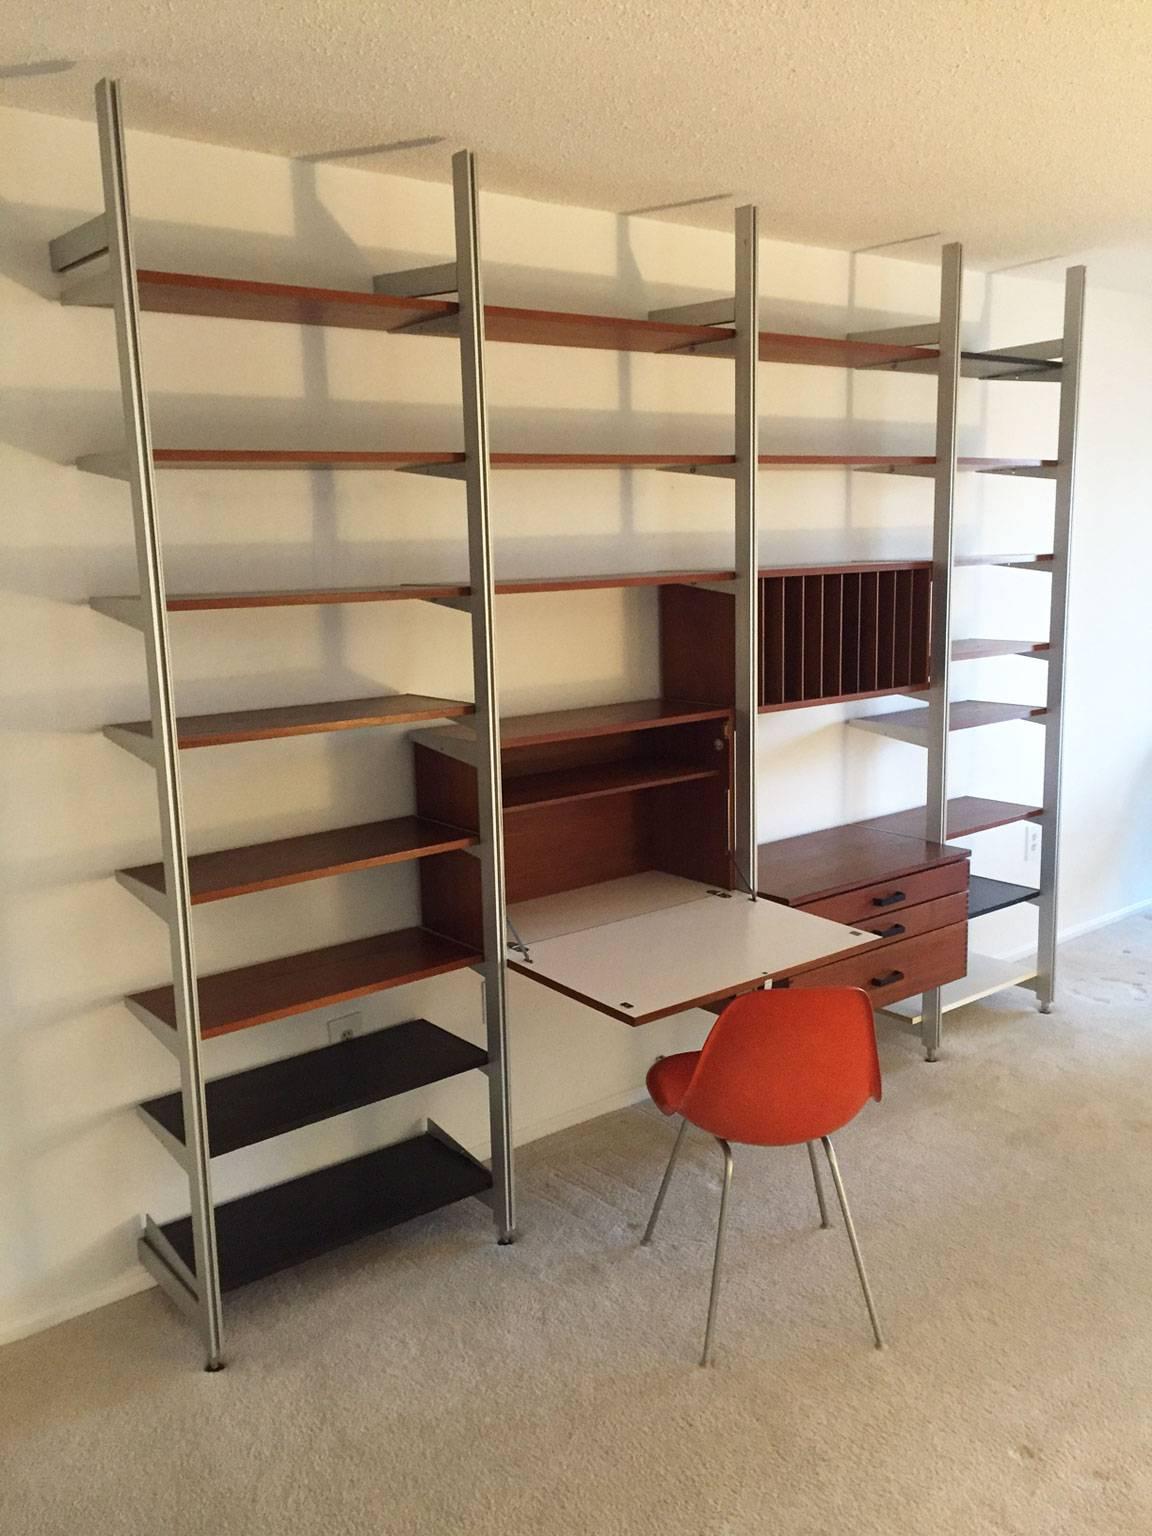 The comprehensive storage system, better known as the CSS, was originally designed by George Nelson in the 1950s. This four-bay system consists of a drop-front desk, three drawers, a slotted cabinet and 20 shelves.